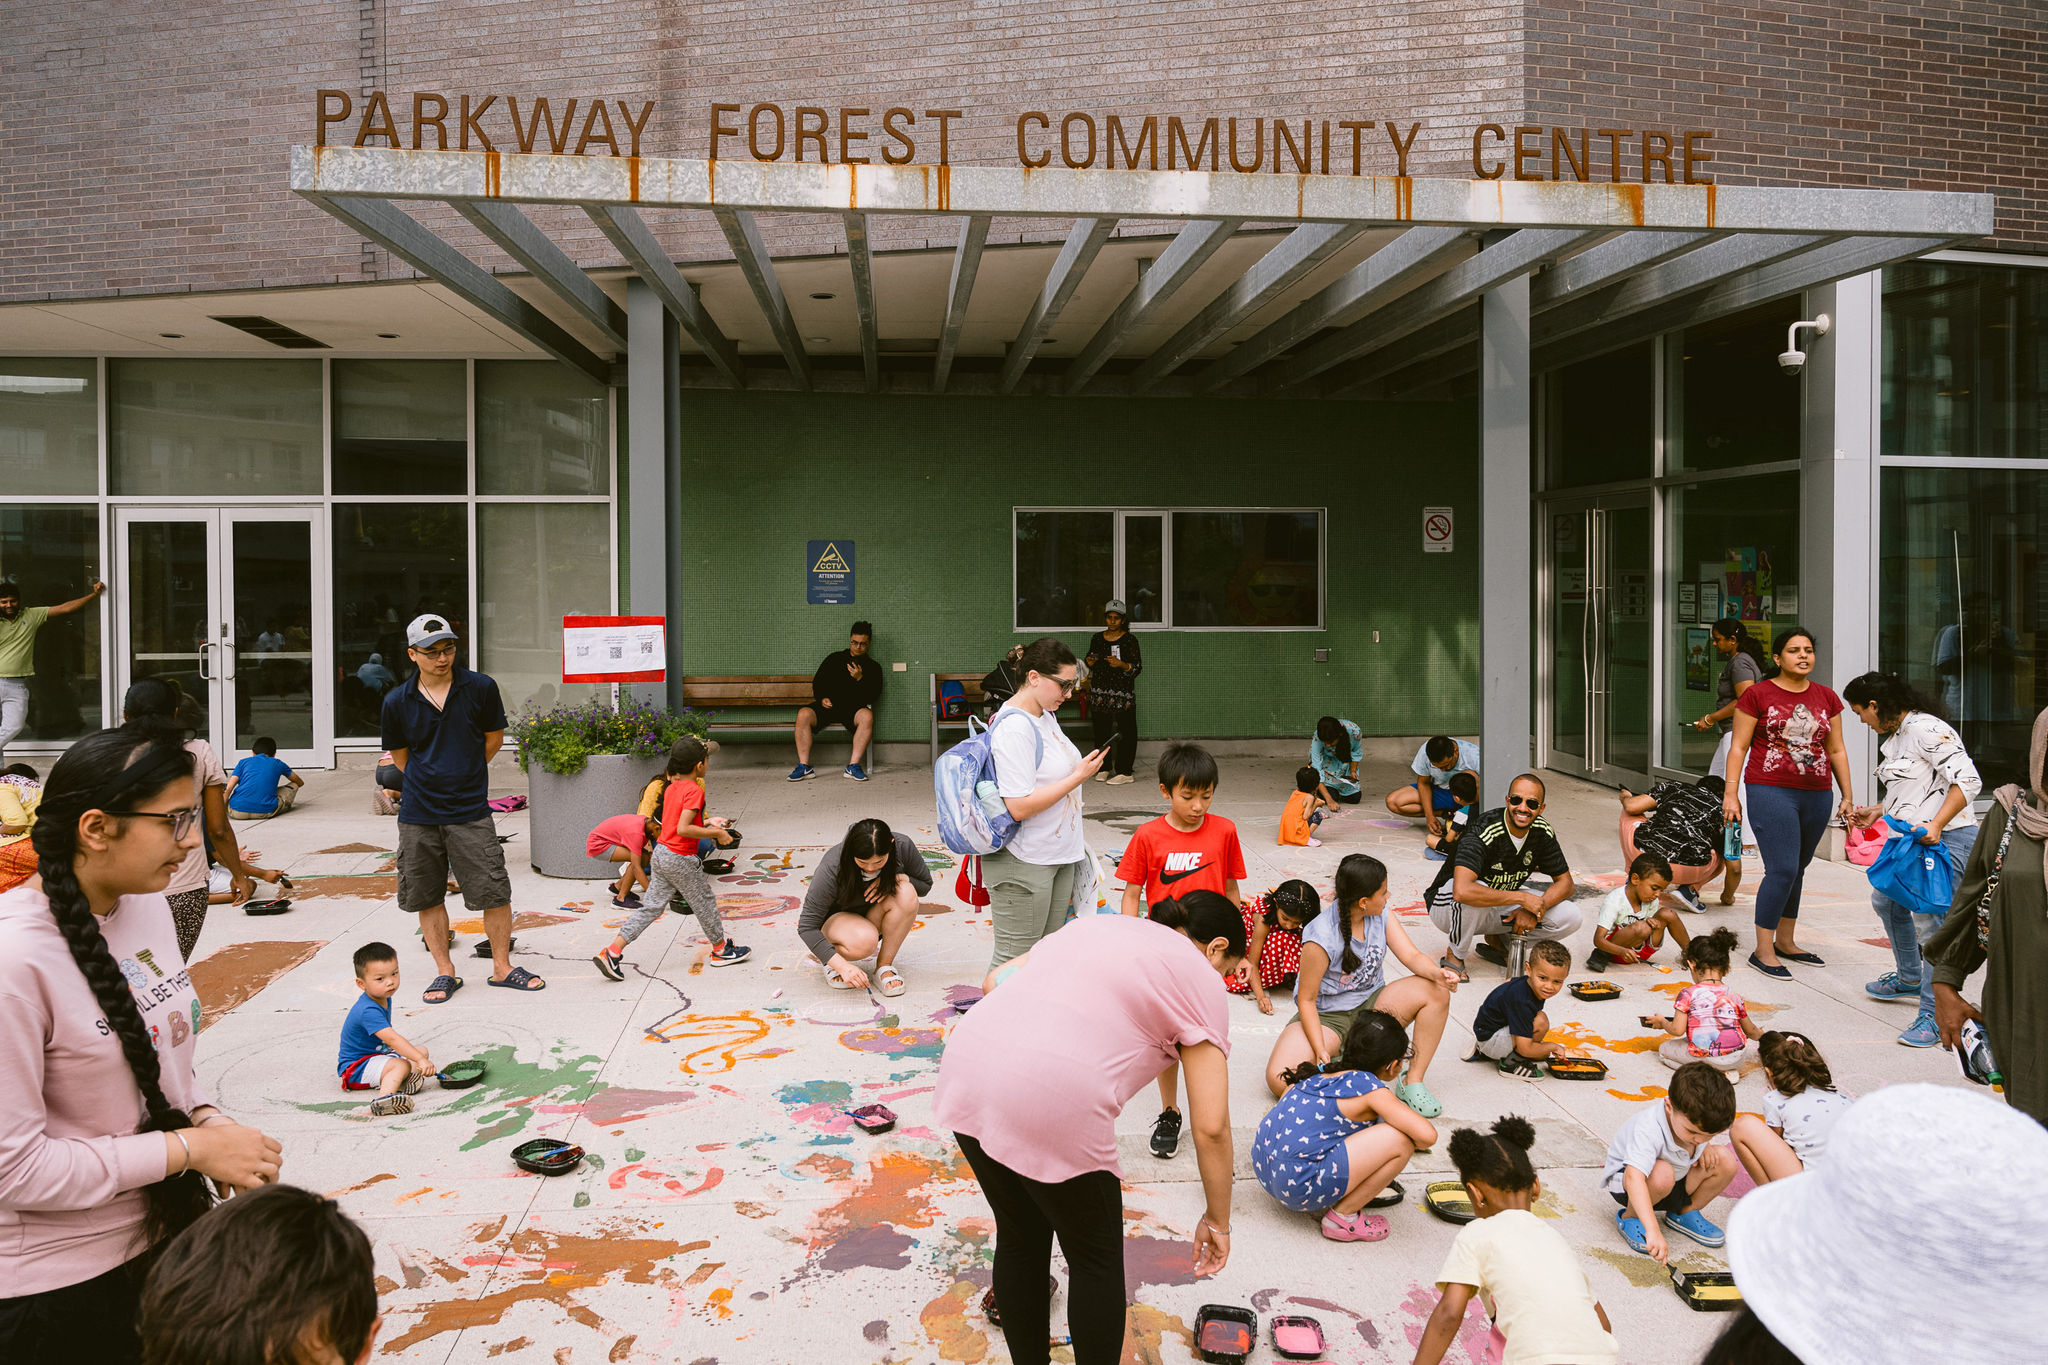 A diverse group of participants painting the ground at Parkway Forest Park.